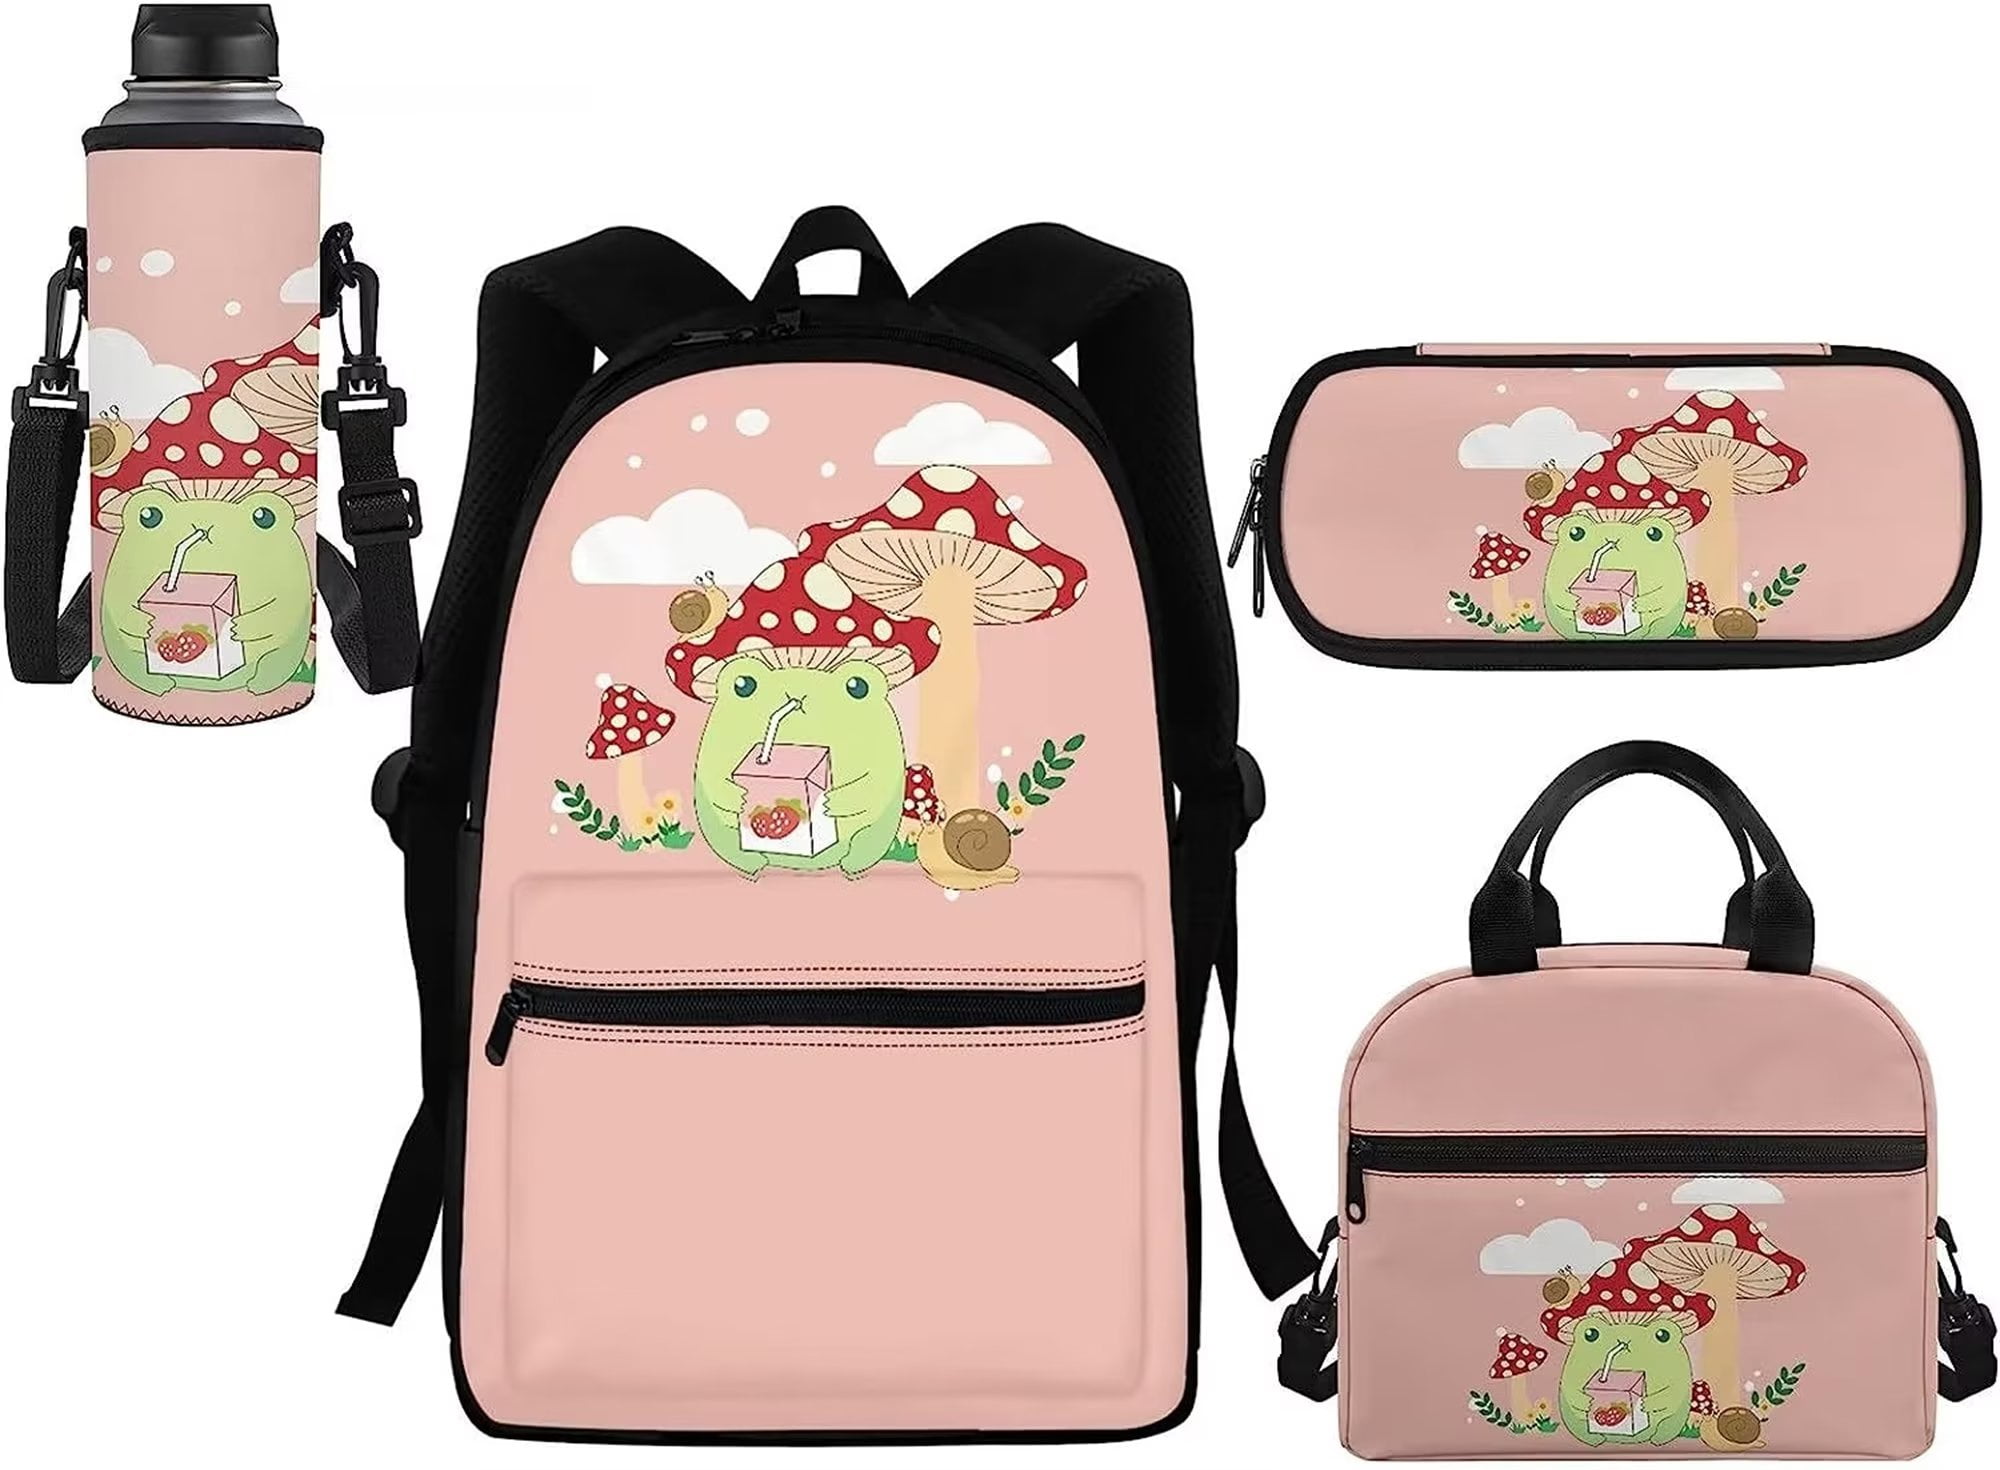 Fkelyi Pink Kitten Cat Bookbag and Lunch Bag Set for Girls Elementary School Backpack 17 inch Back Pack Kids School Bag Lunch Box Bento Pencil Case